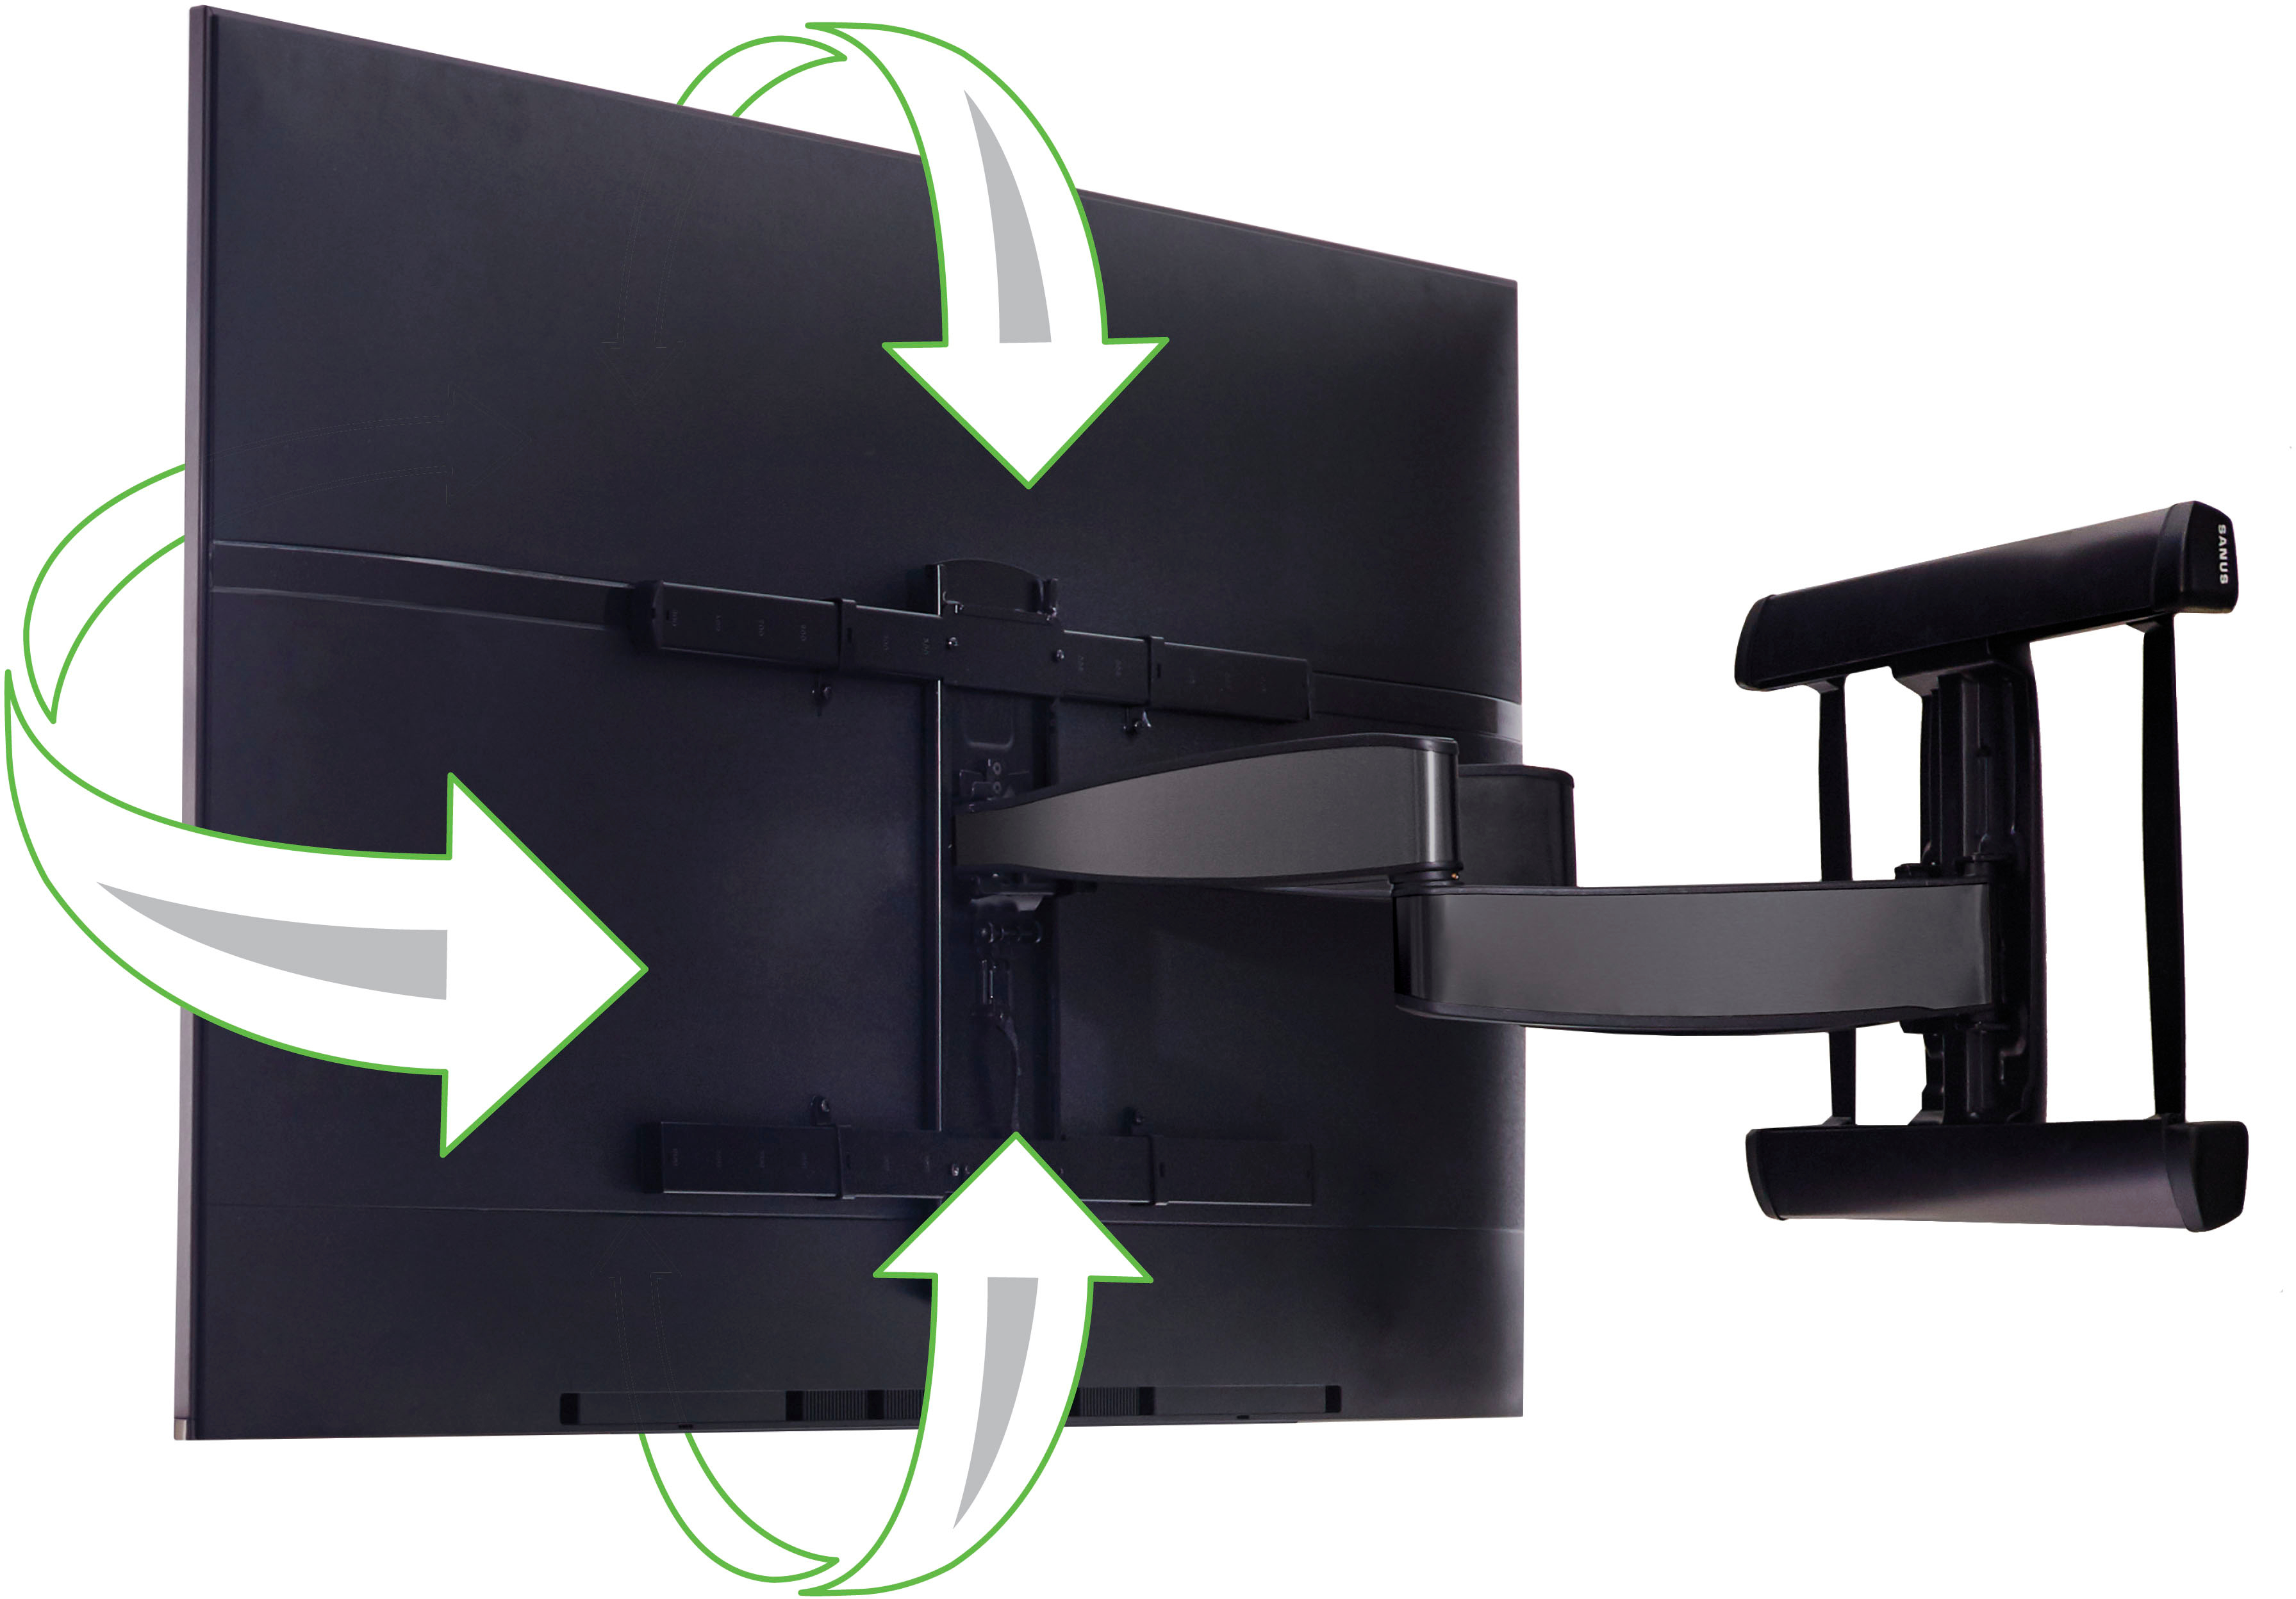 SANUS Elite - Advanced Full-Motion TV Wall Mount for Most 46" - 95" TVs up to 175lbs - Tilts, Swivels, and Extends up to 30" - Graphite